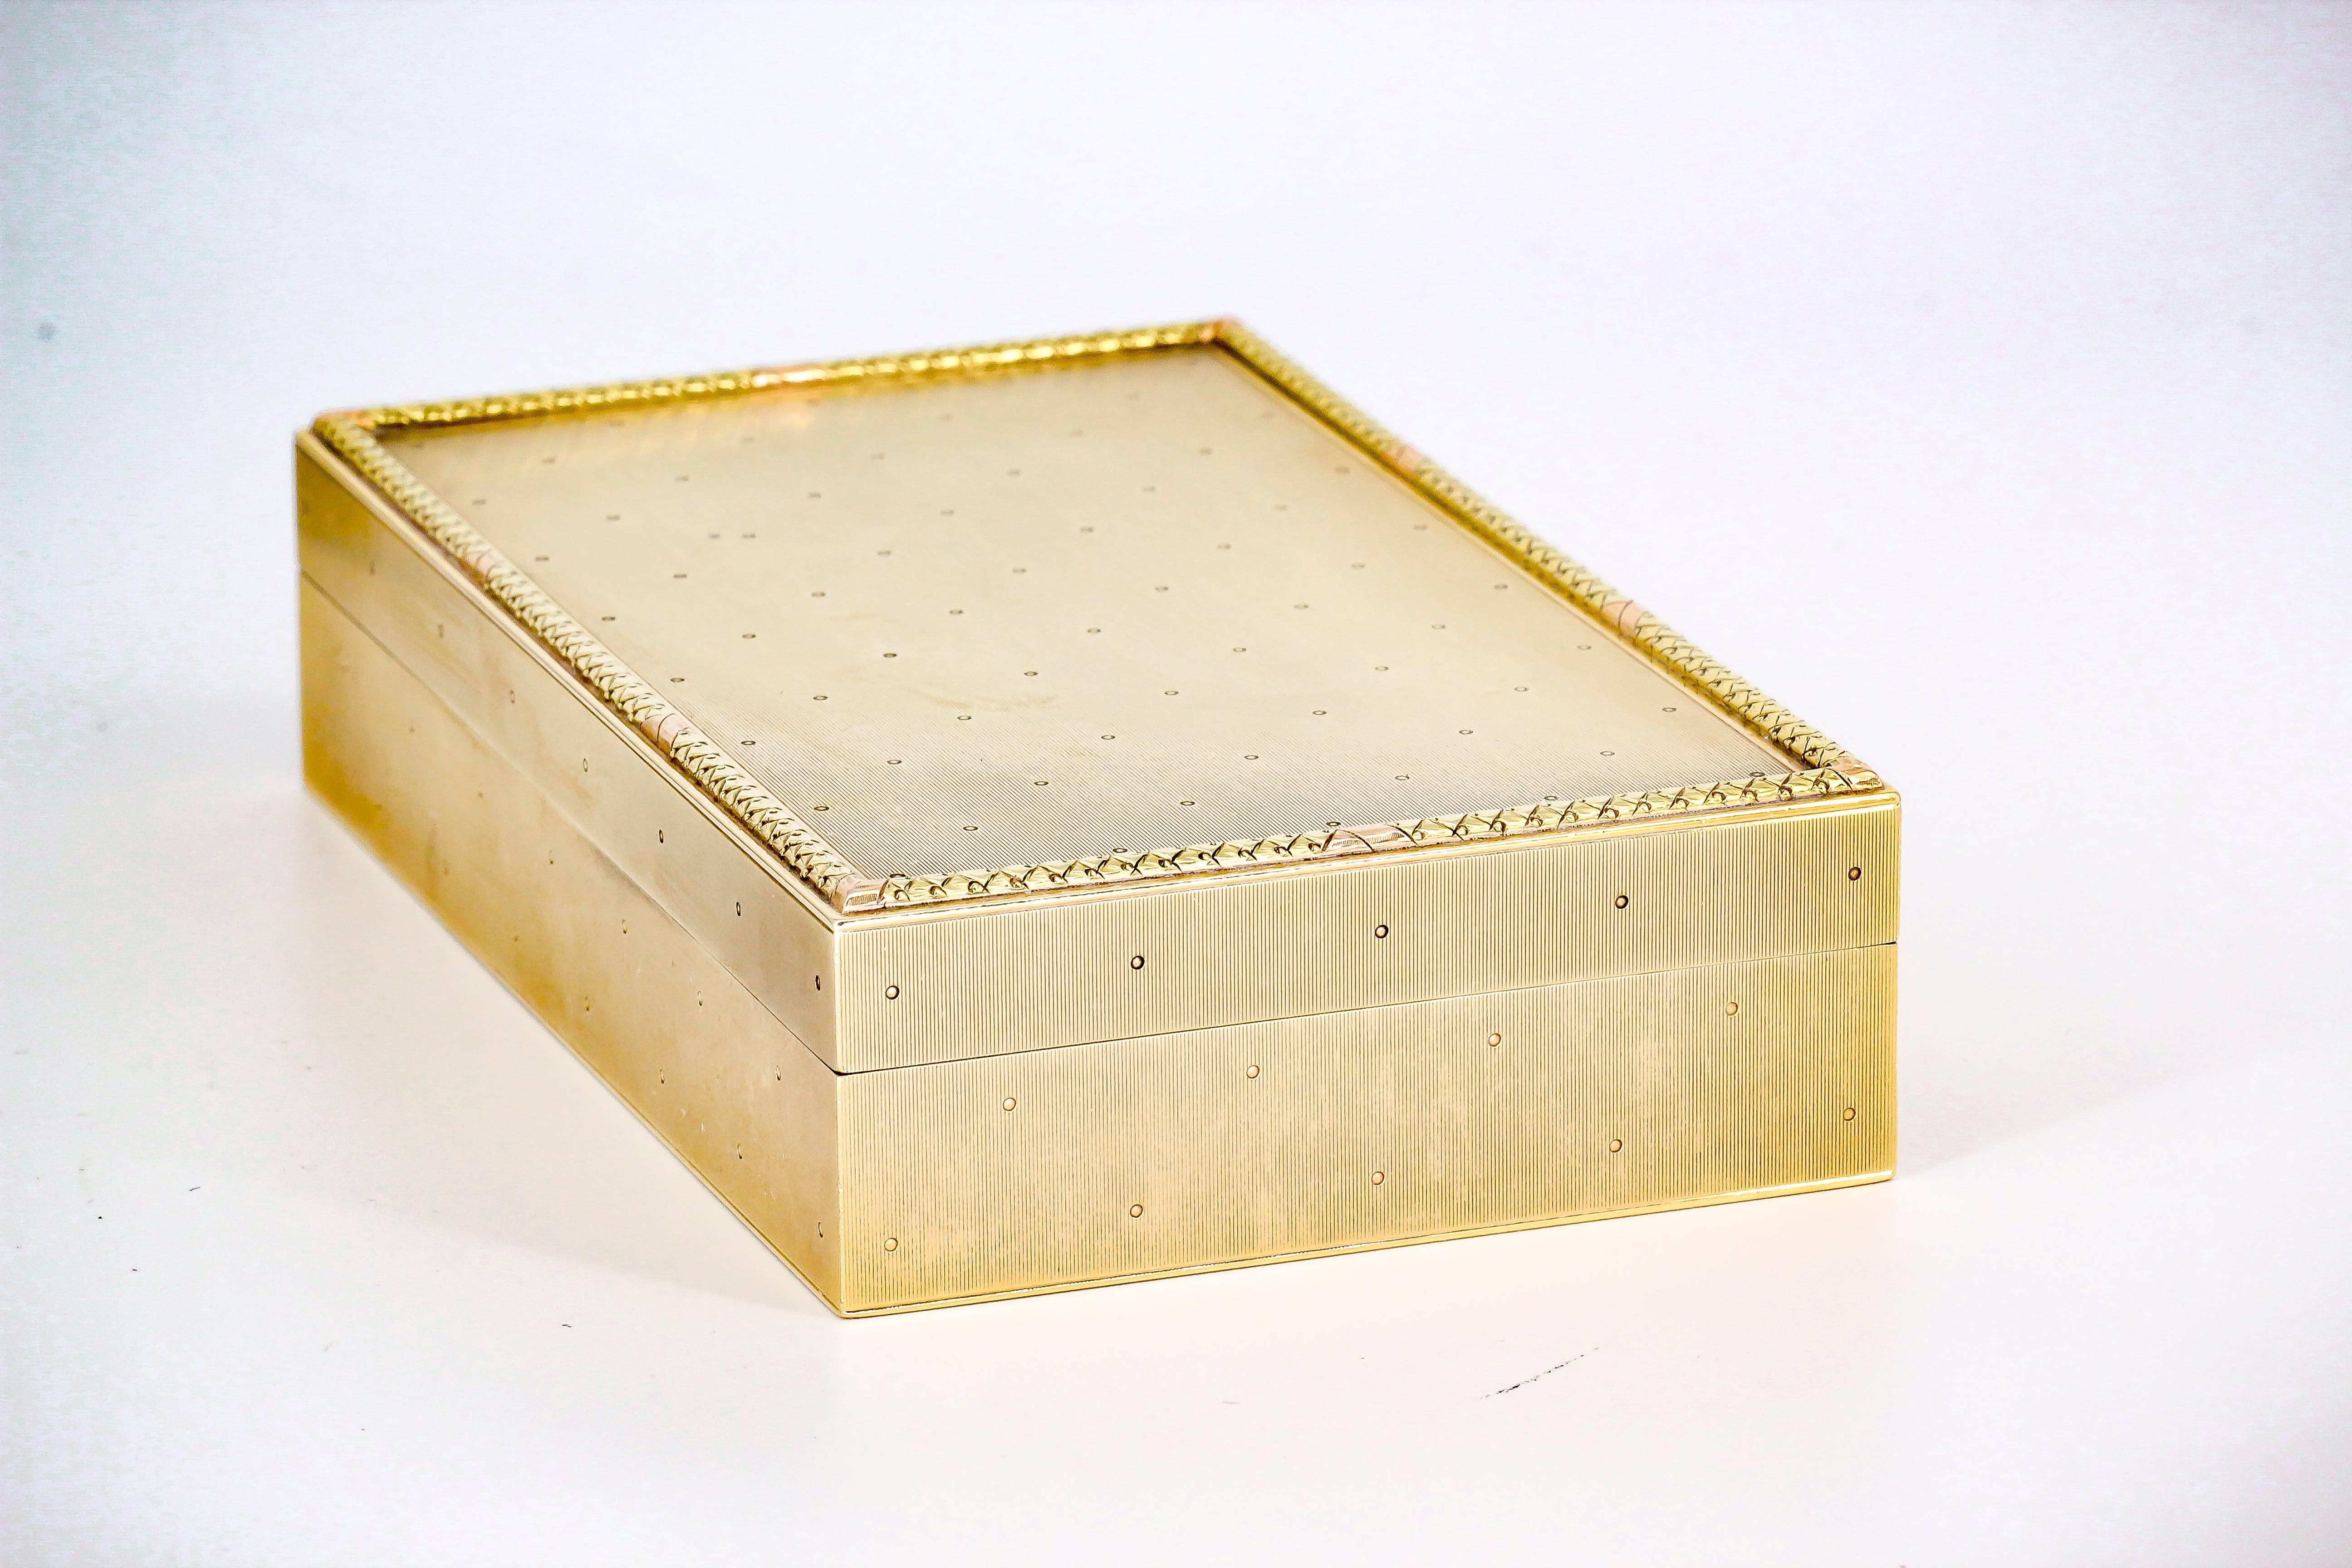 Handsome 14k yellow gold cigar box by Cartier, circa 1930s. It features a rather simple layout, with adorned outer border on top lid. Surface is ribbed and feels almost textured to the touch. Beautifully made and a great display piece.

Hallmarks: